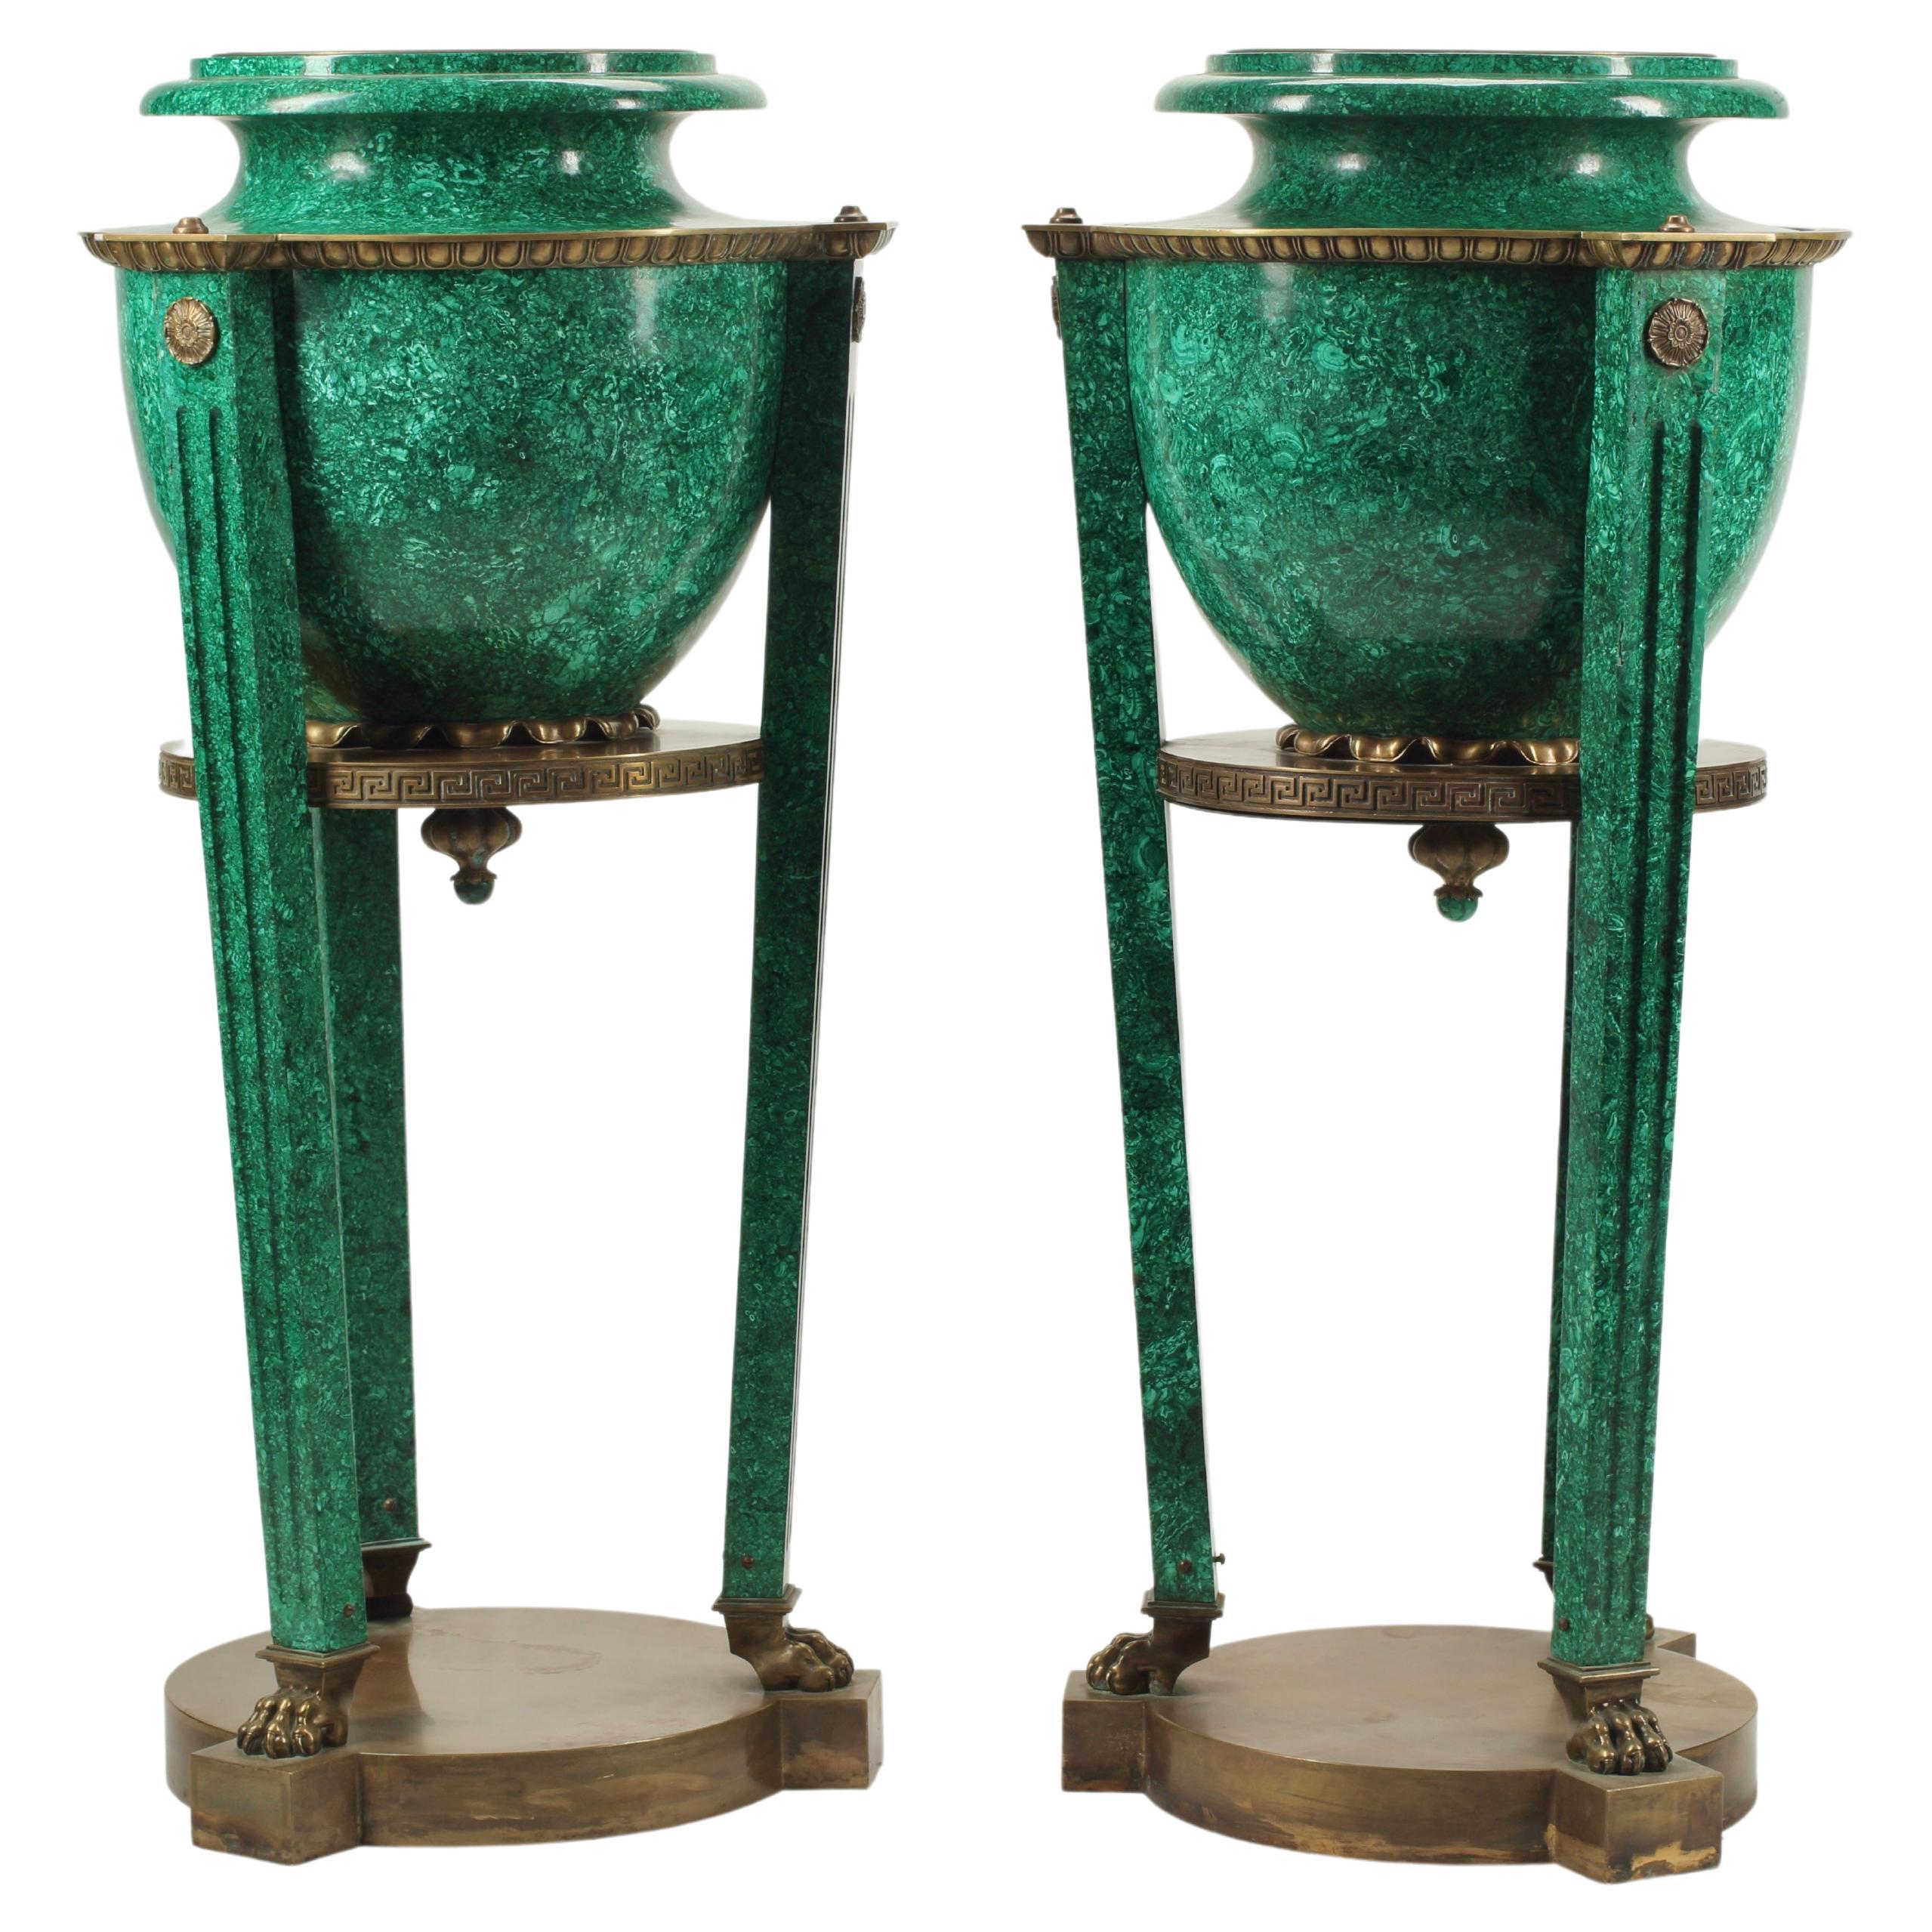 Monumental Pair of Malachite and Bronze Neoclassical Style Urns on Stand For Sale